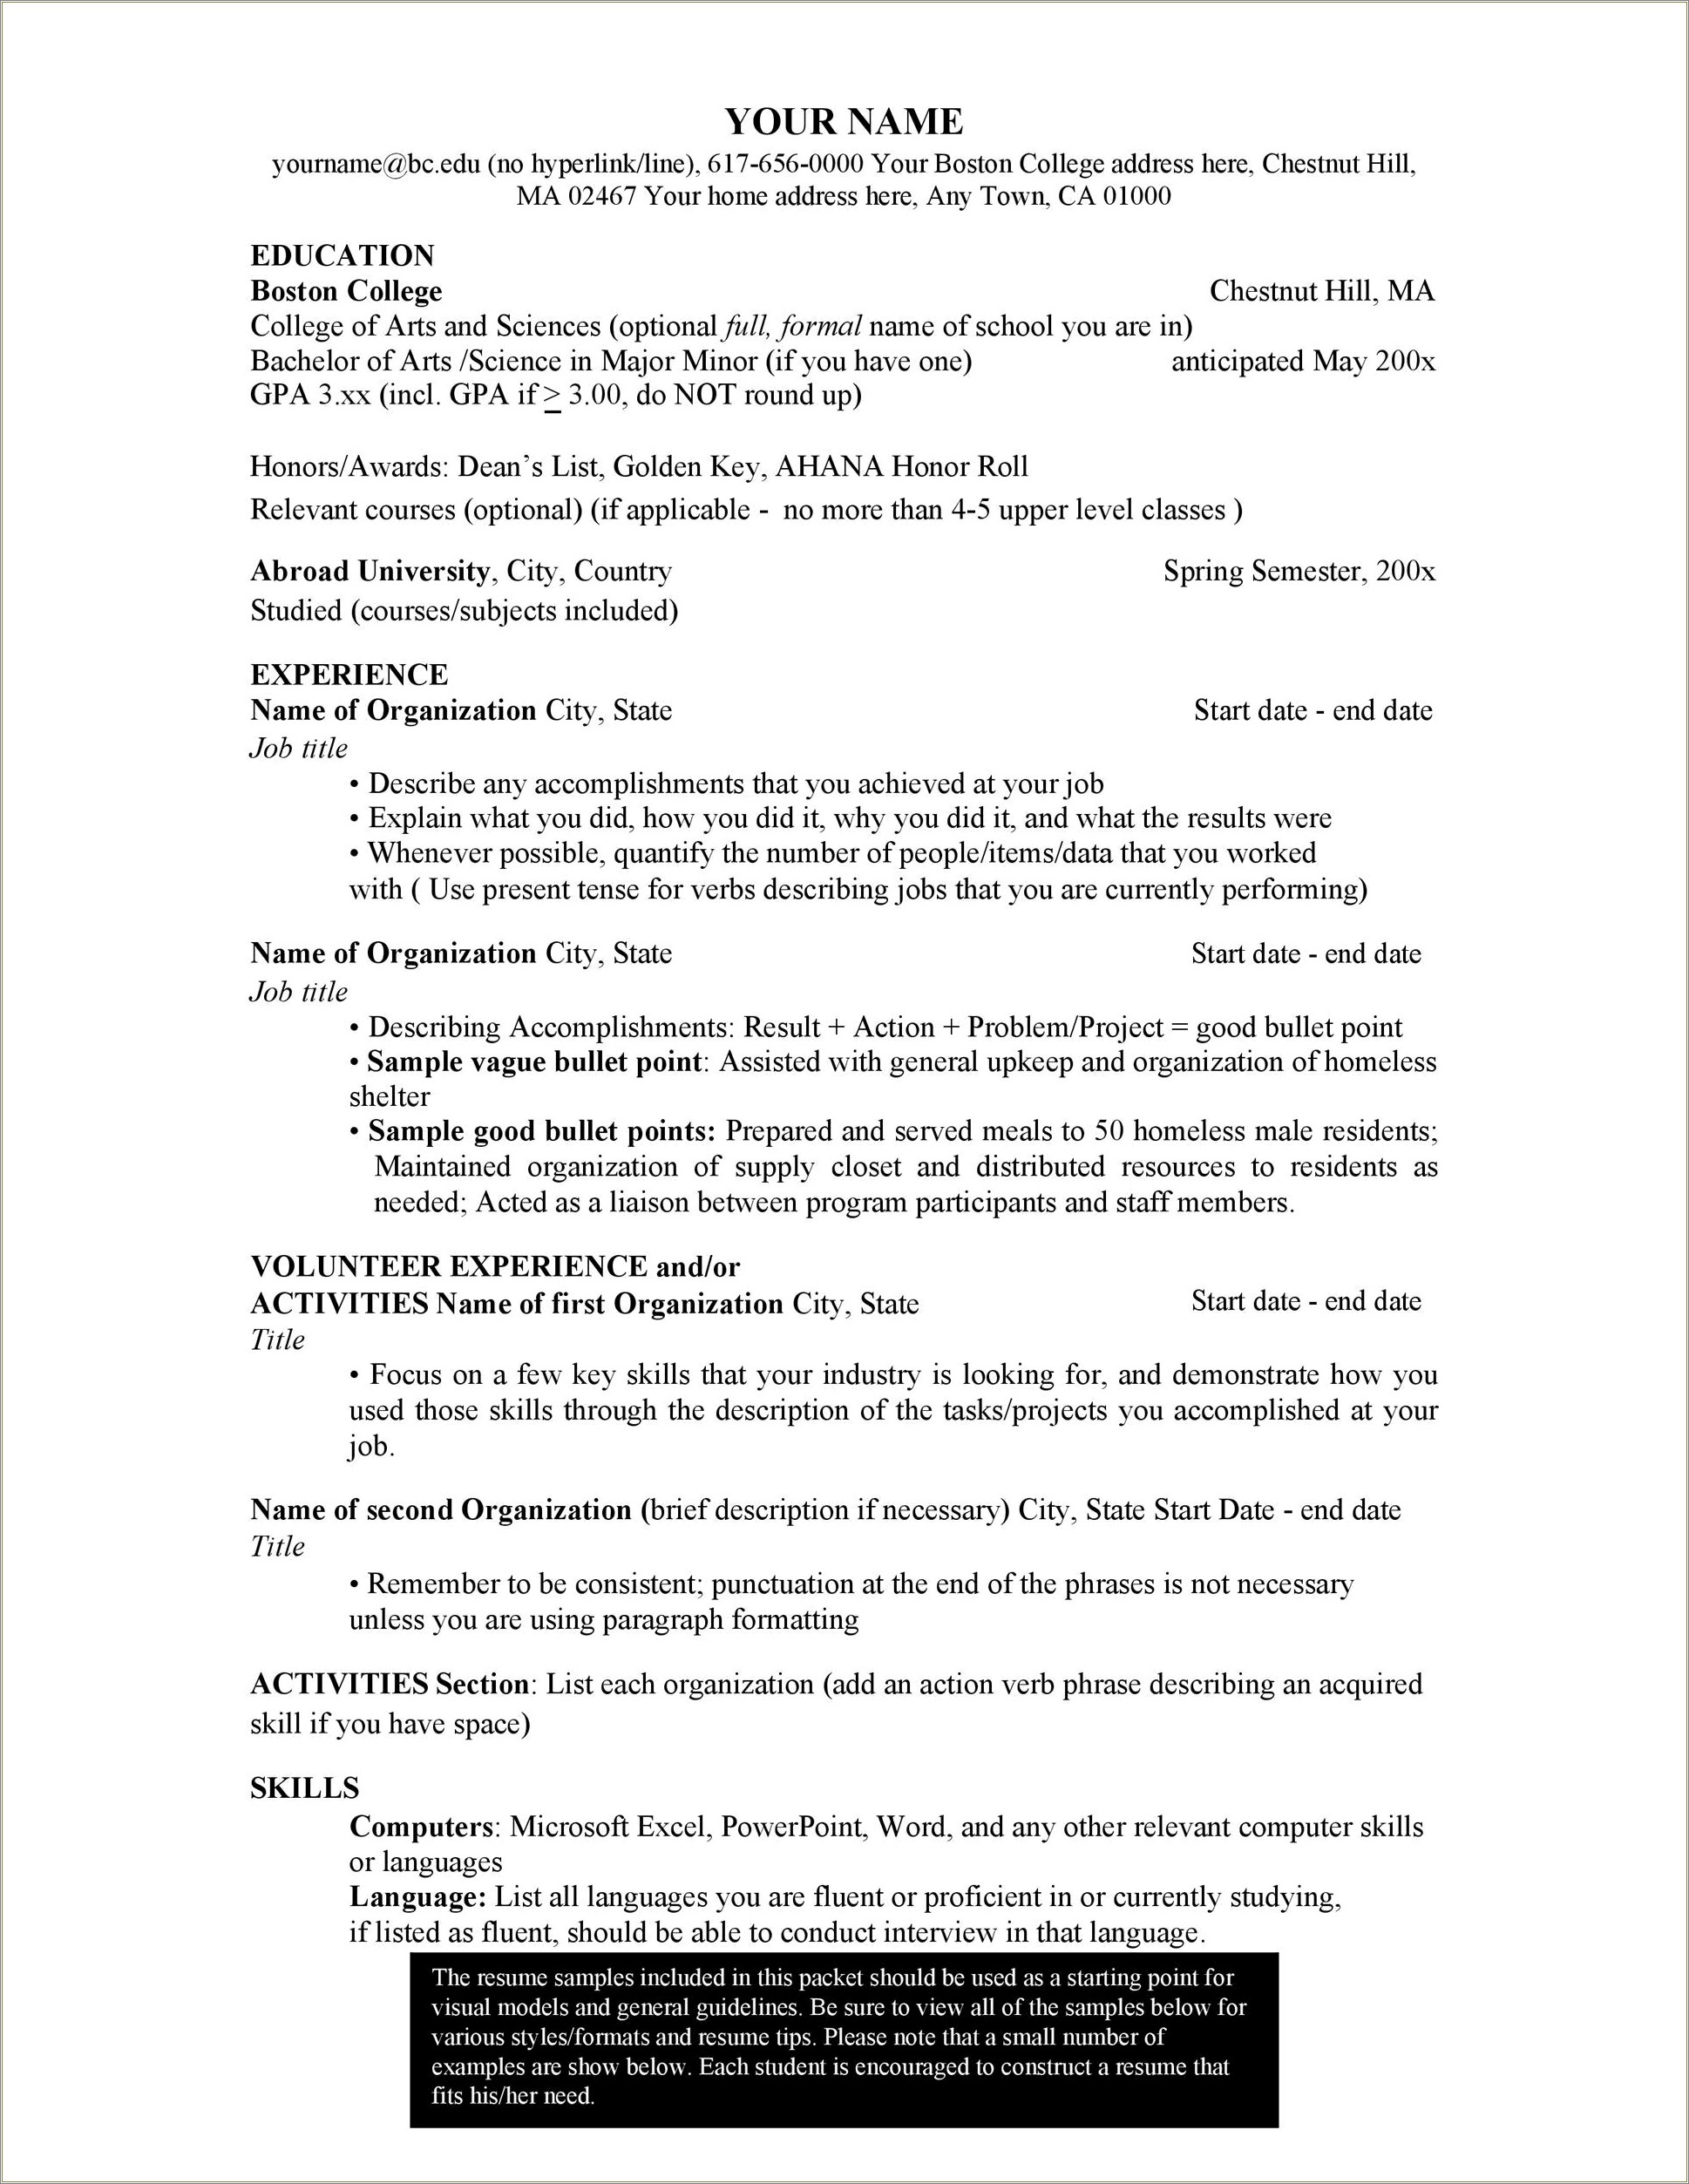 Resume Sample With Major And Minor